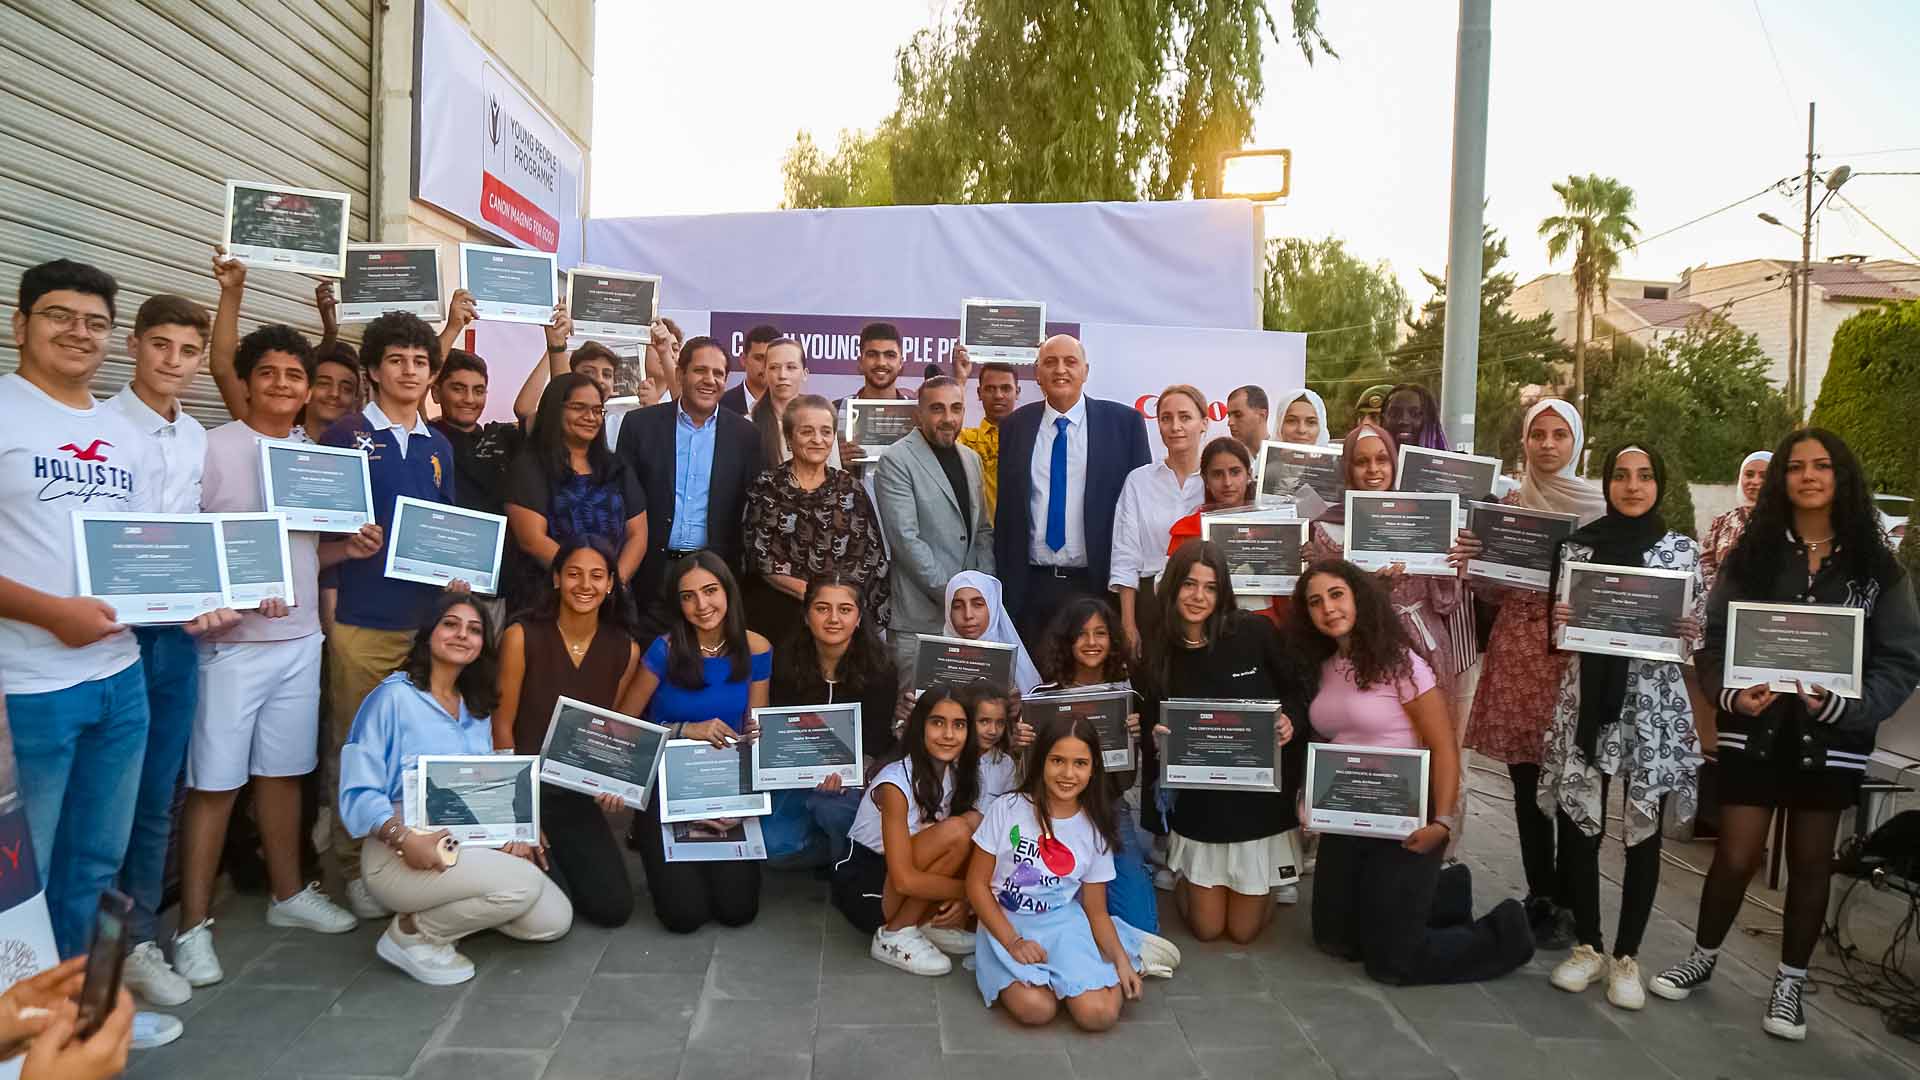 Canon celebrates the triumphs of the “young people programme” students in jordan with stories that matter